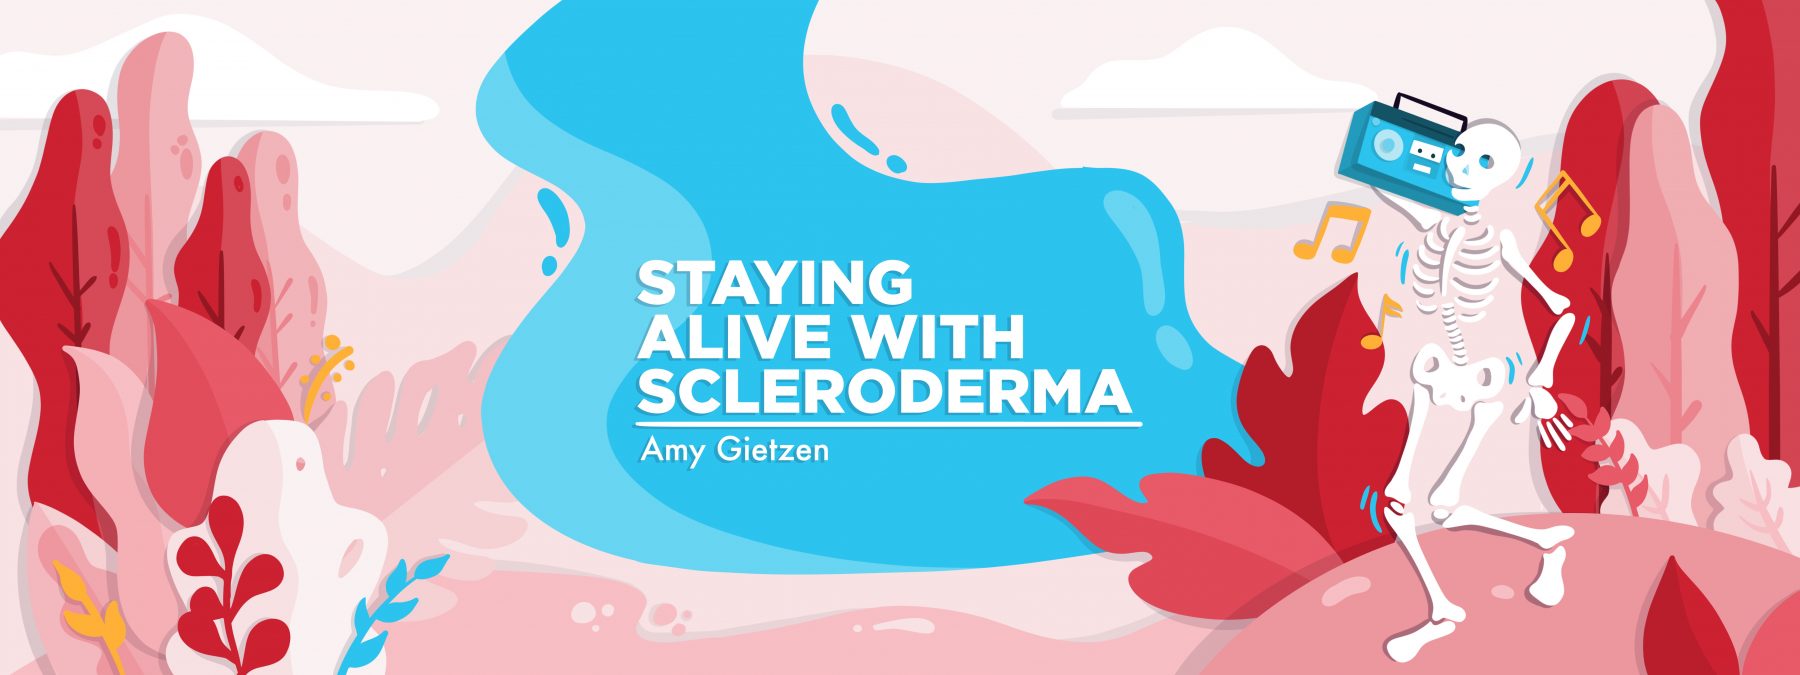 coping with pain | Scleroderma News | diagnosis | banner image for 